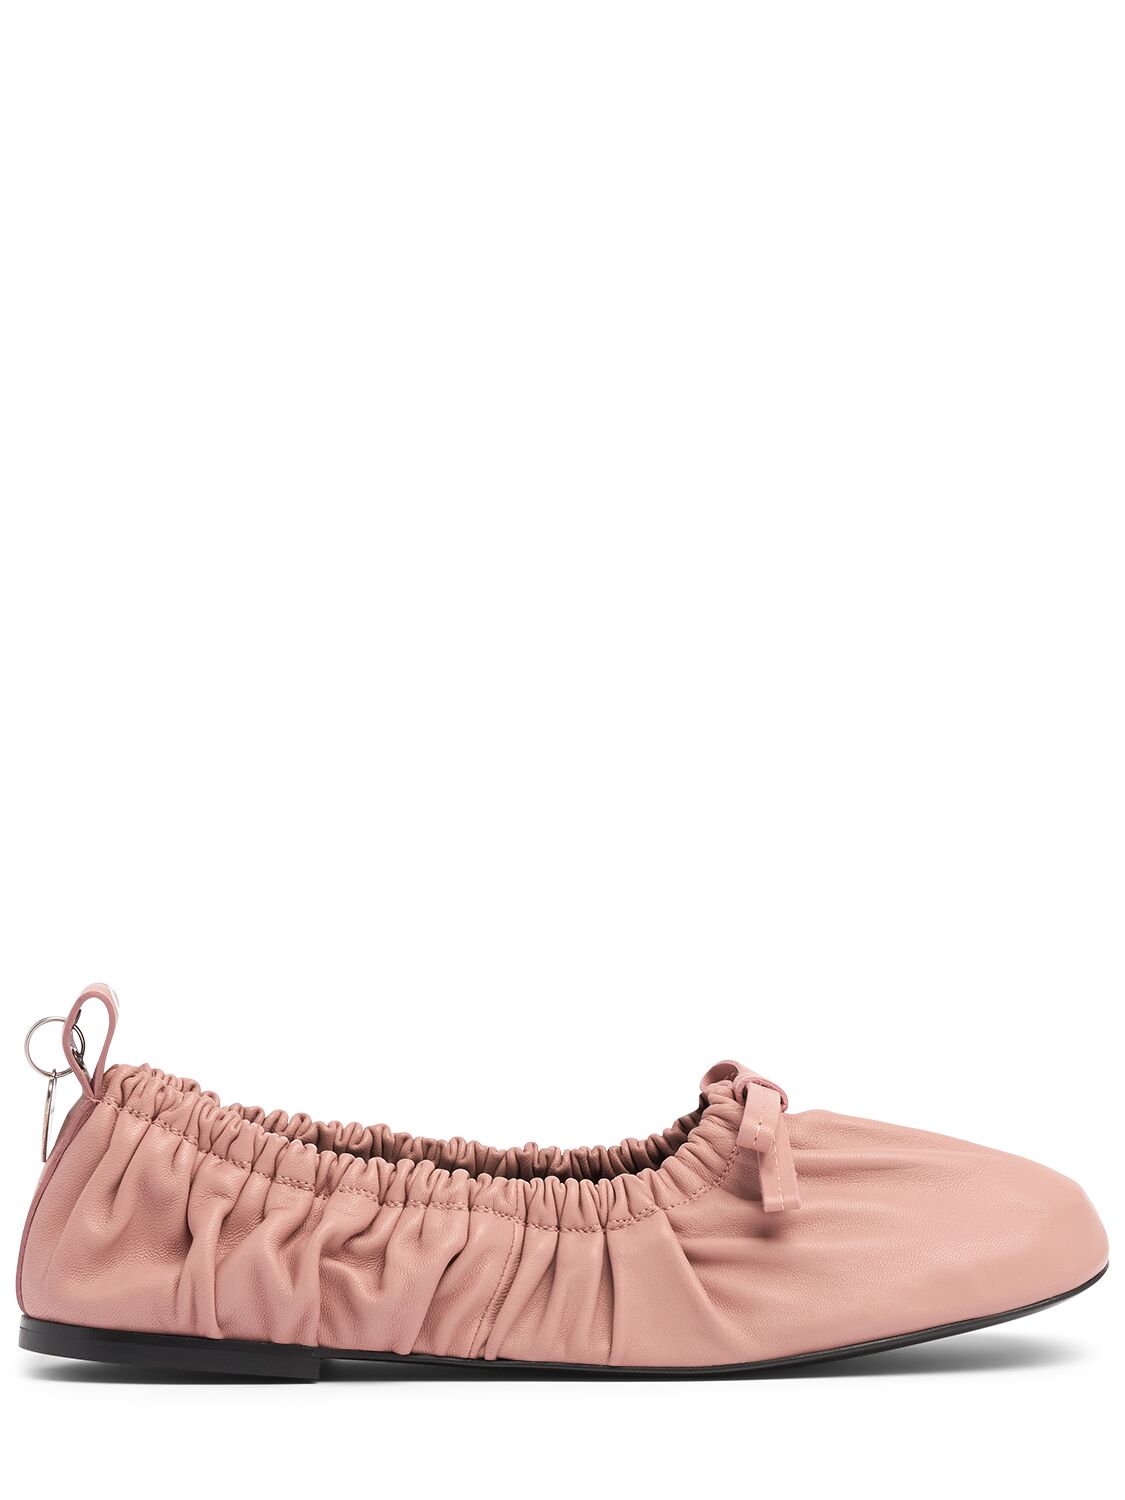 Acne Studios 10mm Leather Ballerinas In Pink